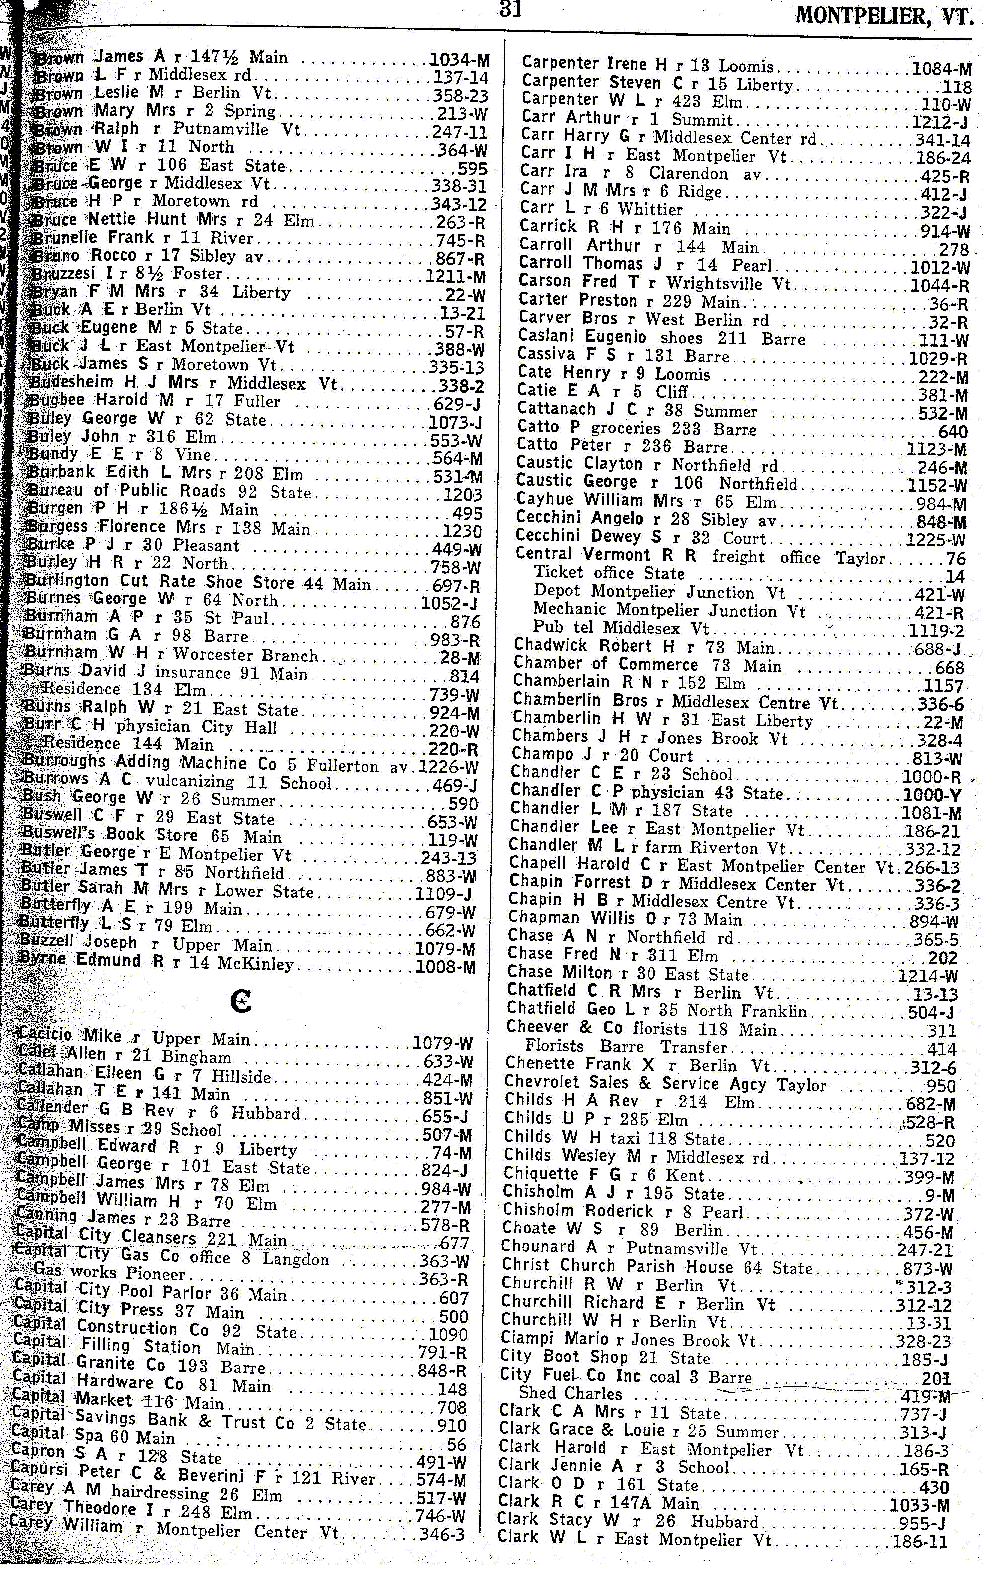 1928 Montpelier Vt Telephone Book - Page 31